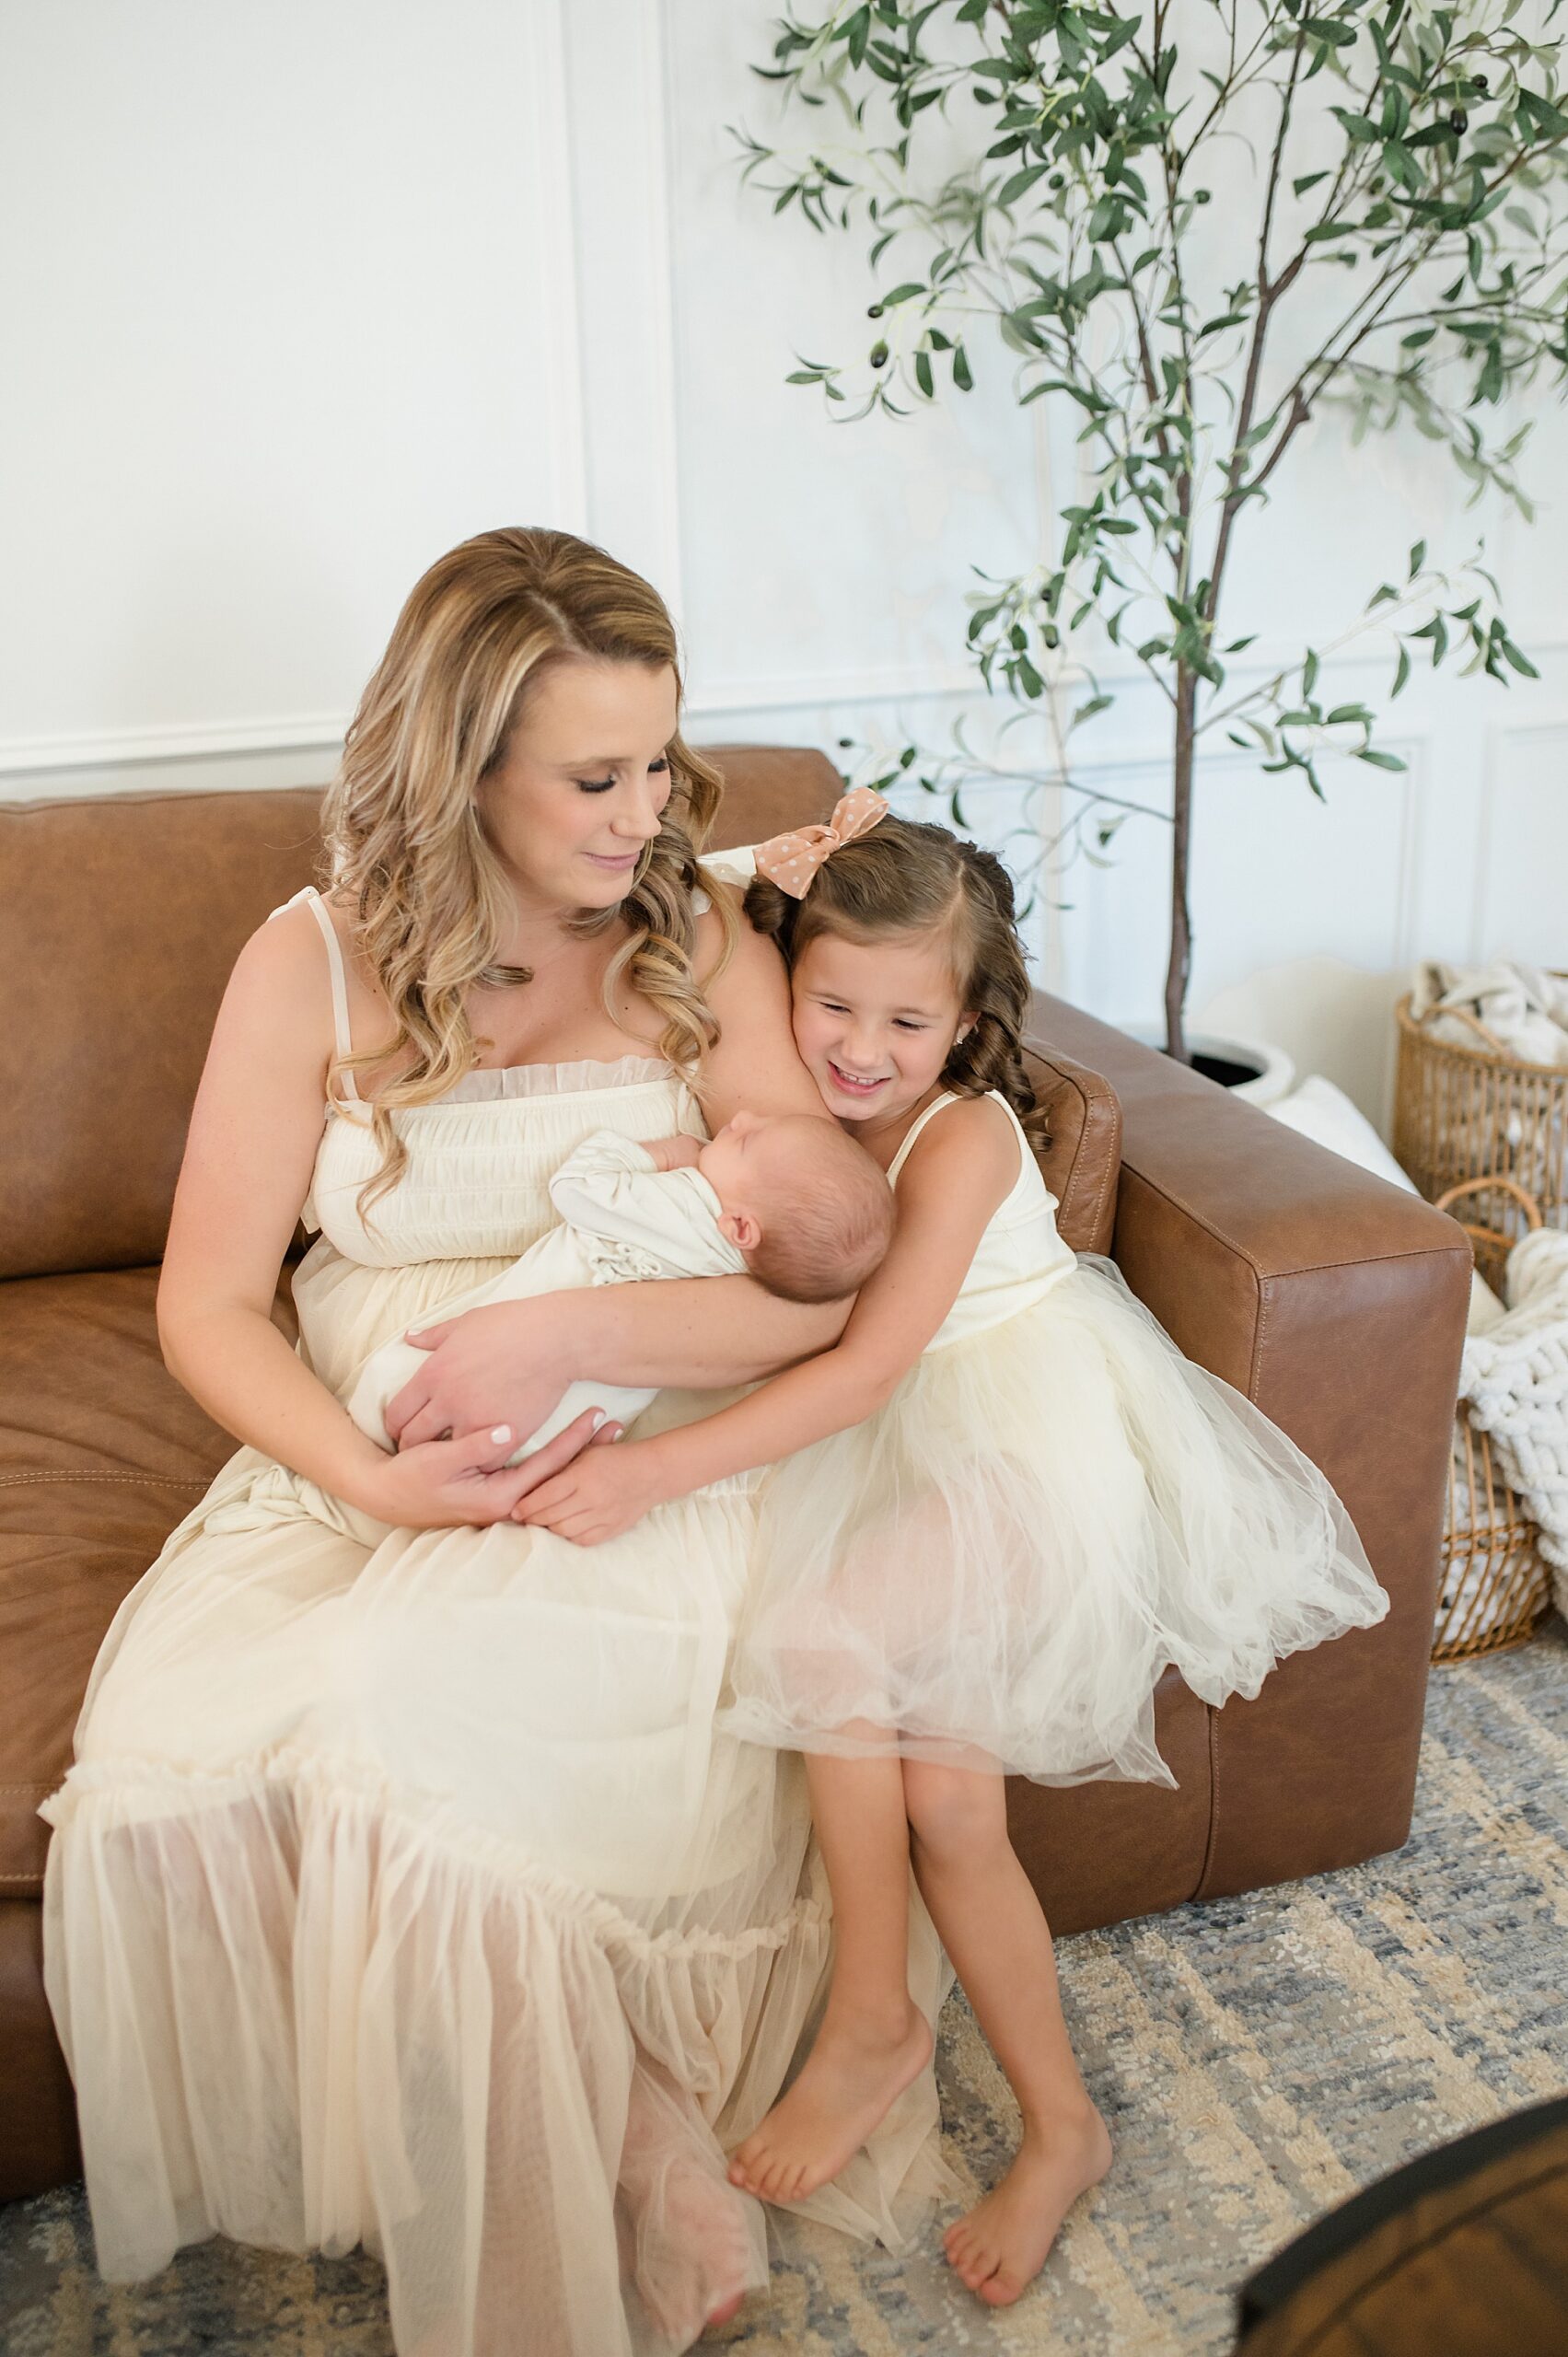 mom holds newborn with older daughter nearby taken by Lindsey Dutton Photography, a Dallas newborn photographer
